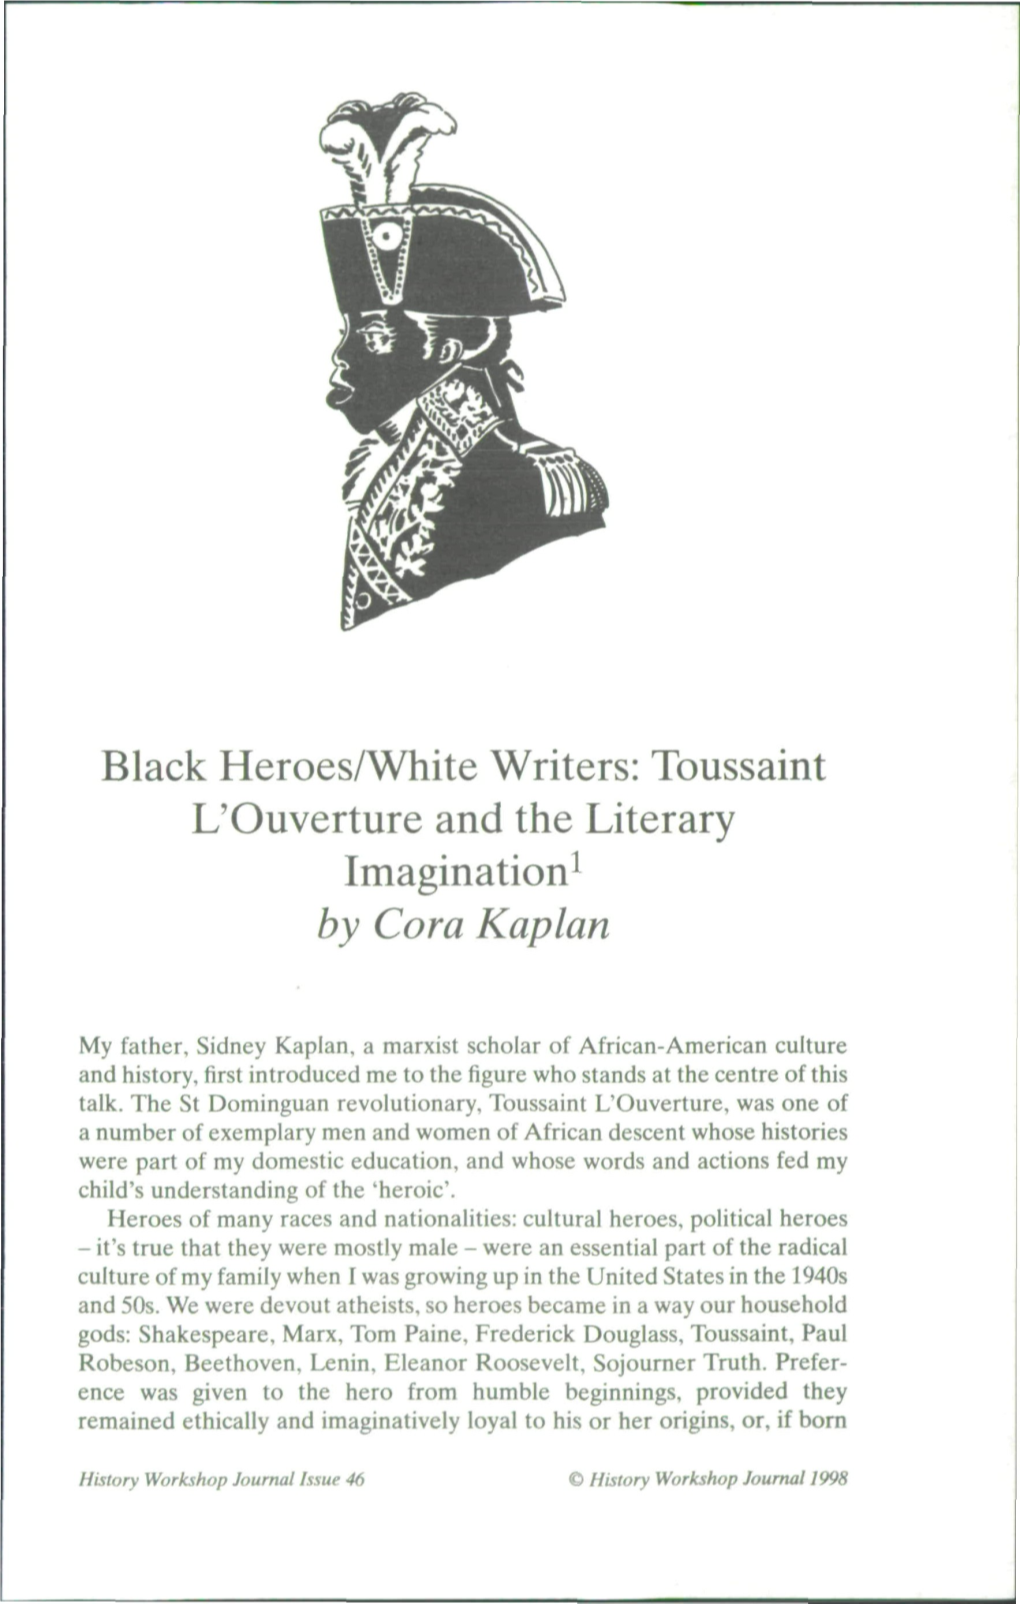 Toussaint L'ouverture and the Literary Imagination1 by Cora Kaplan